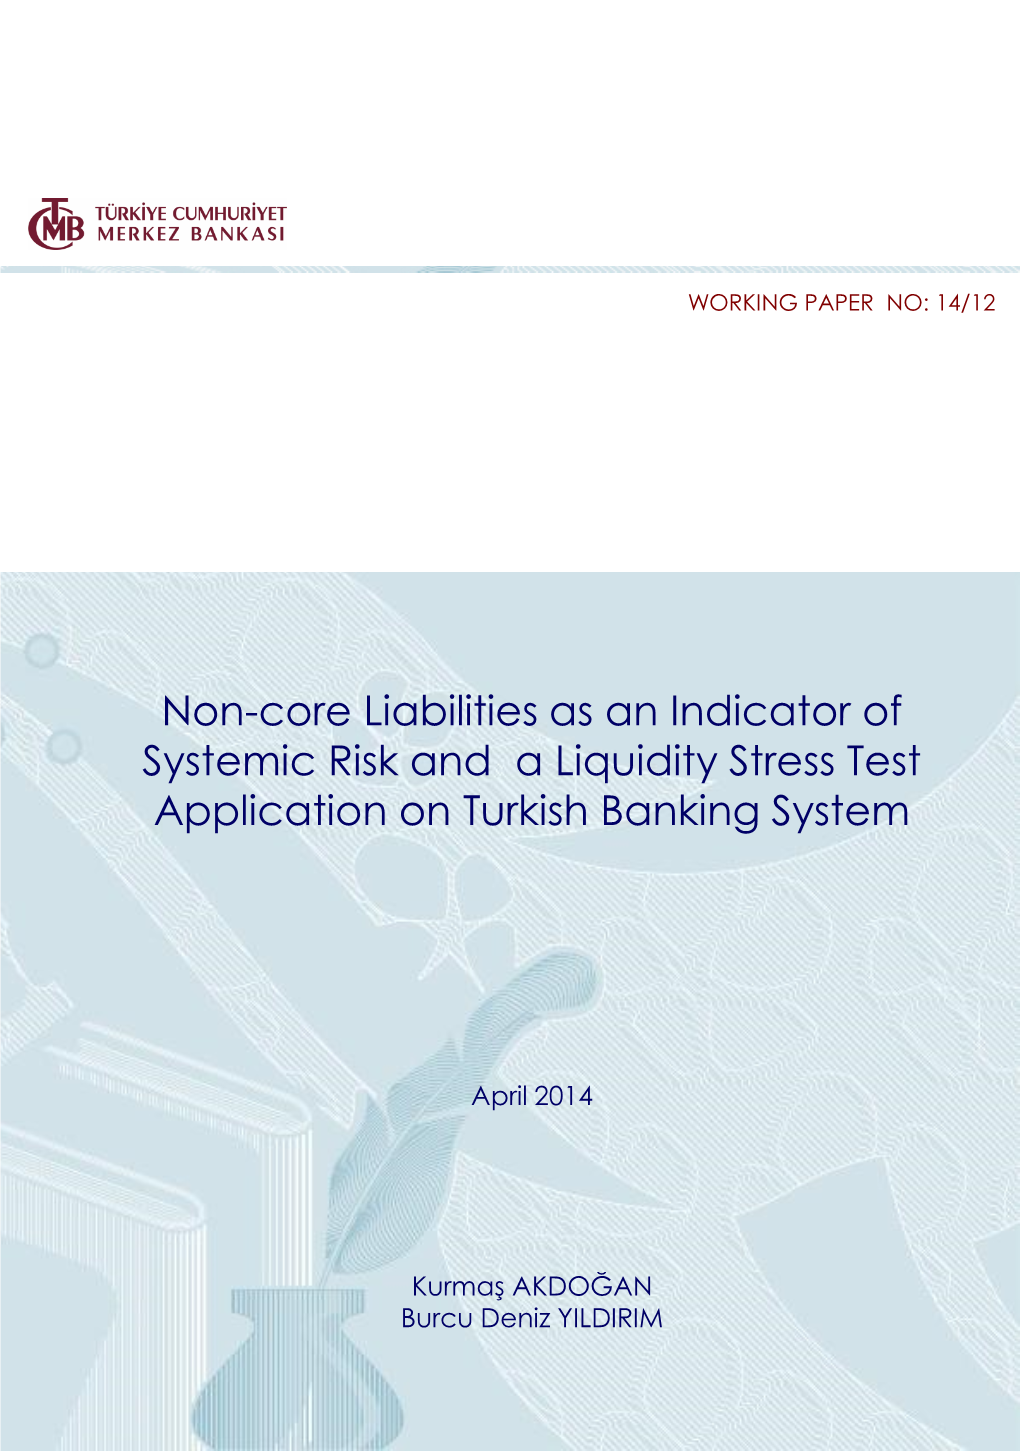 Non-Core Liabilities As an Indicator of Systemic Risk and a Liquidity Stress Test Application on Turkish Banking System